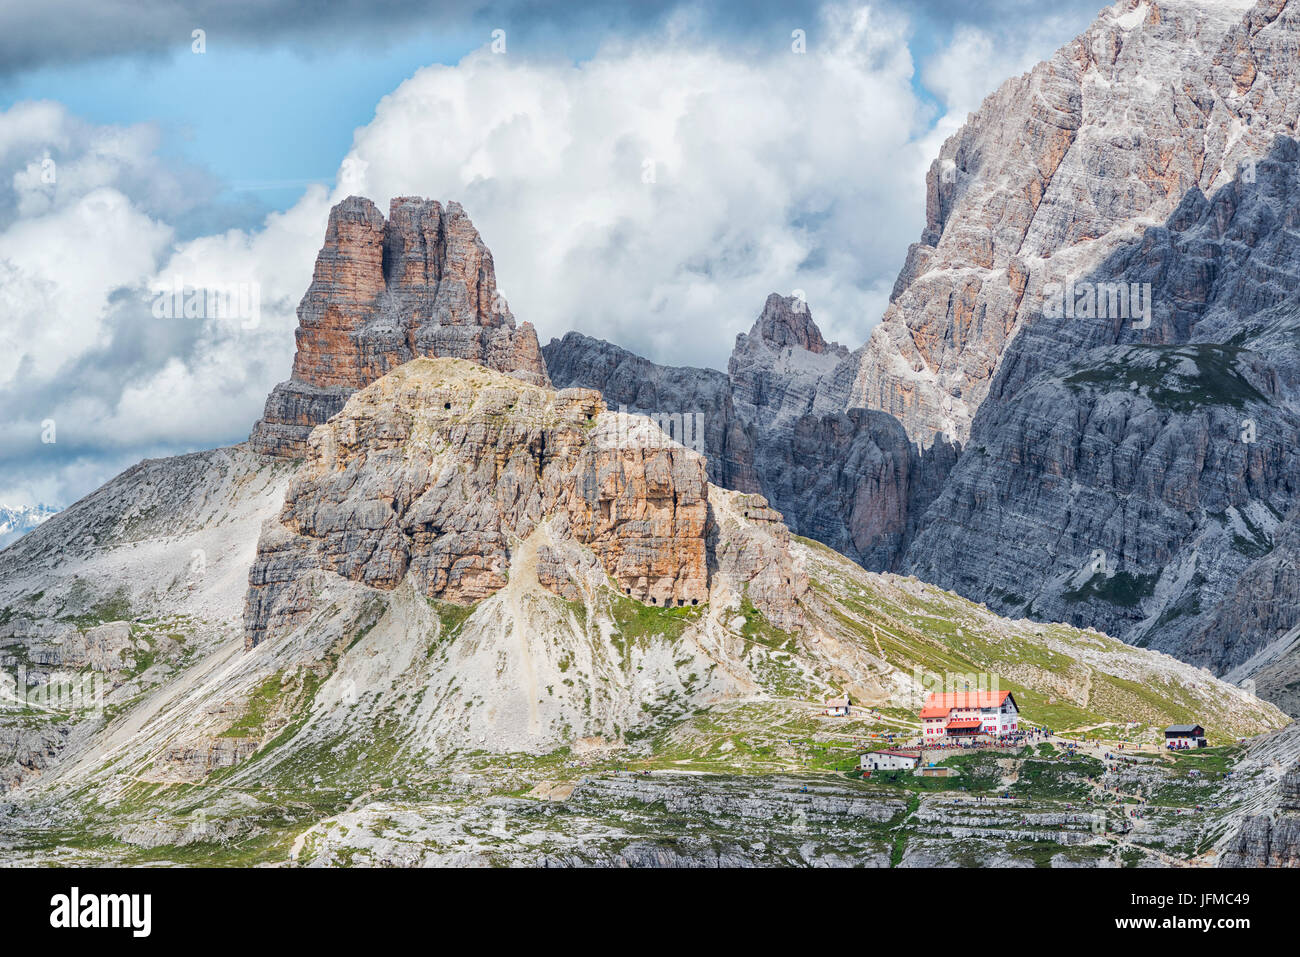 Trentino Alto Adige, Italy, Europe Park of the Tre Cime di Lavaredo, the Dolomite mountains taken during a day with clouds, In the background you can see Mount Paterno and the refuge Locatelli Stock Photo